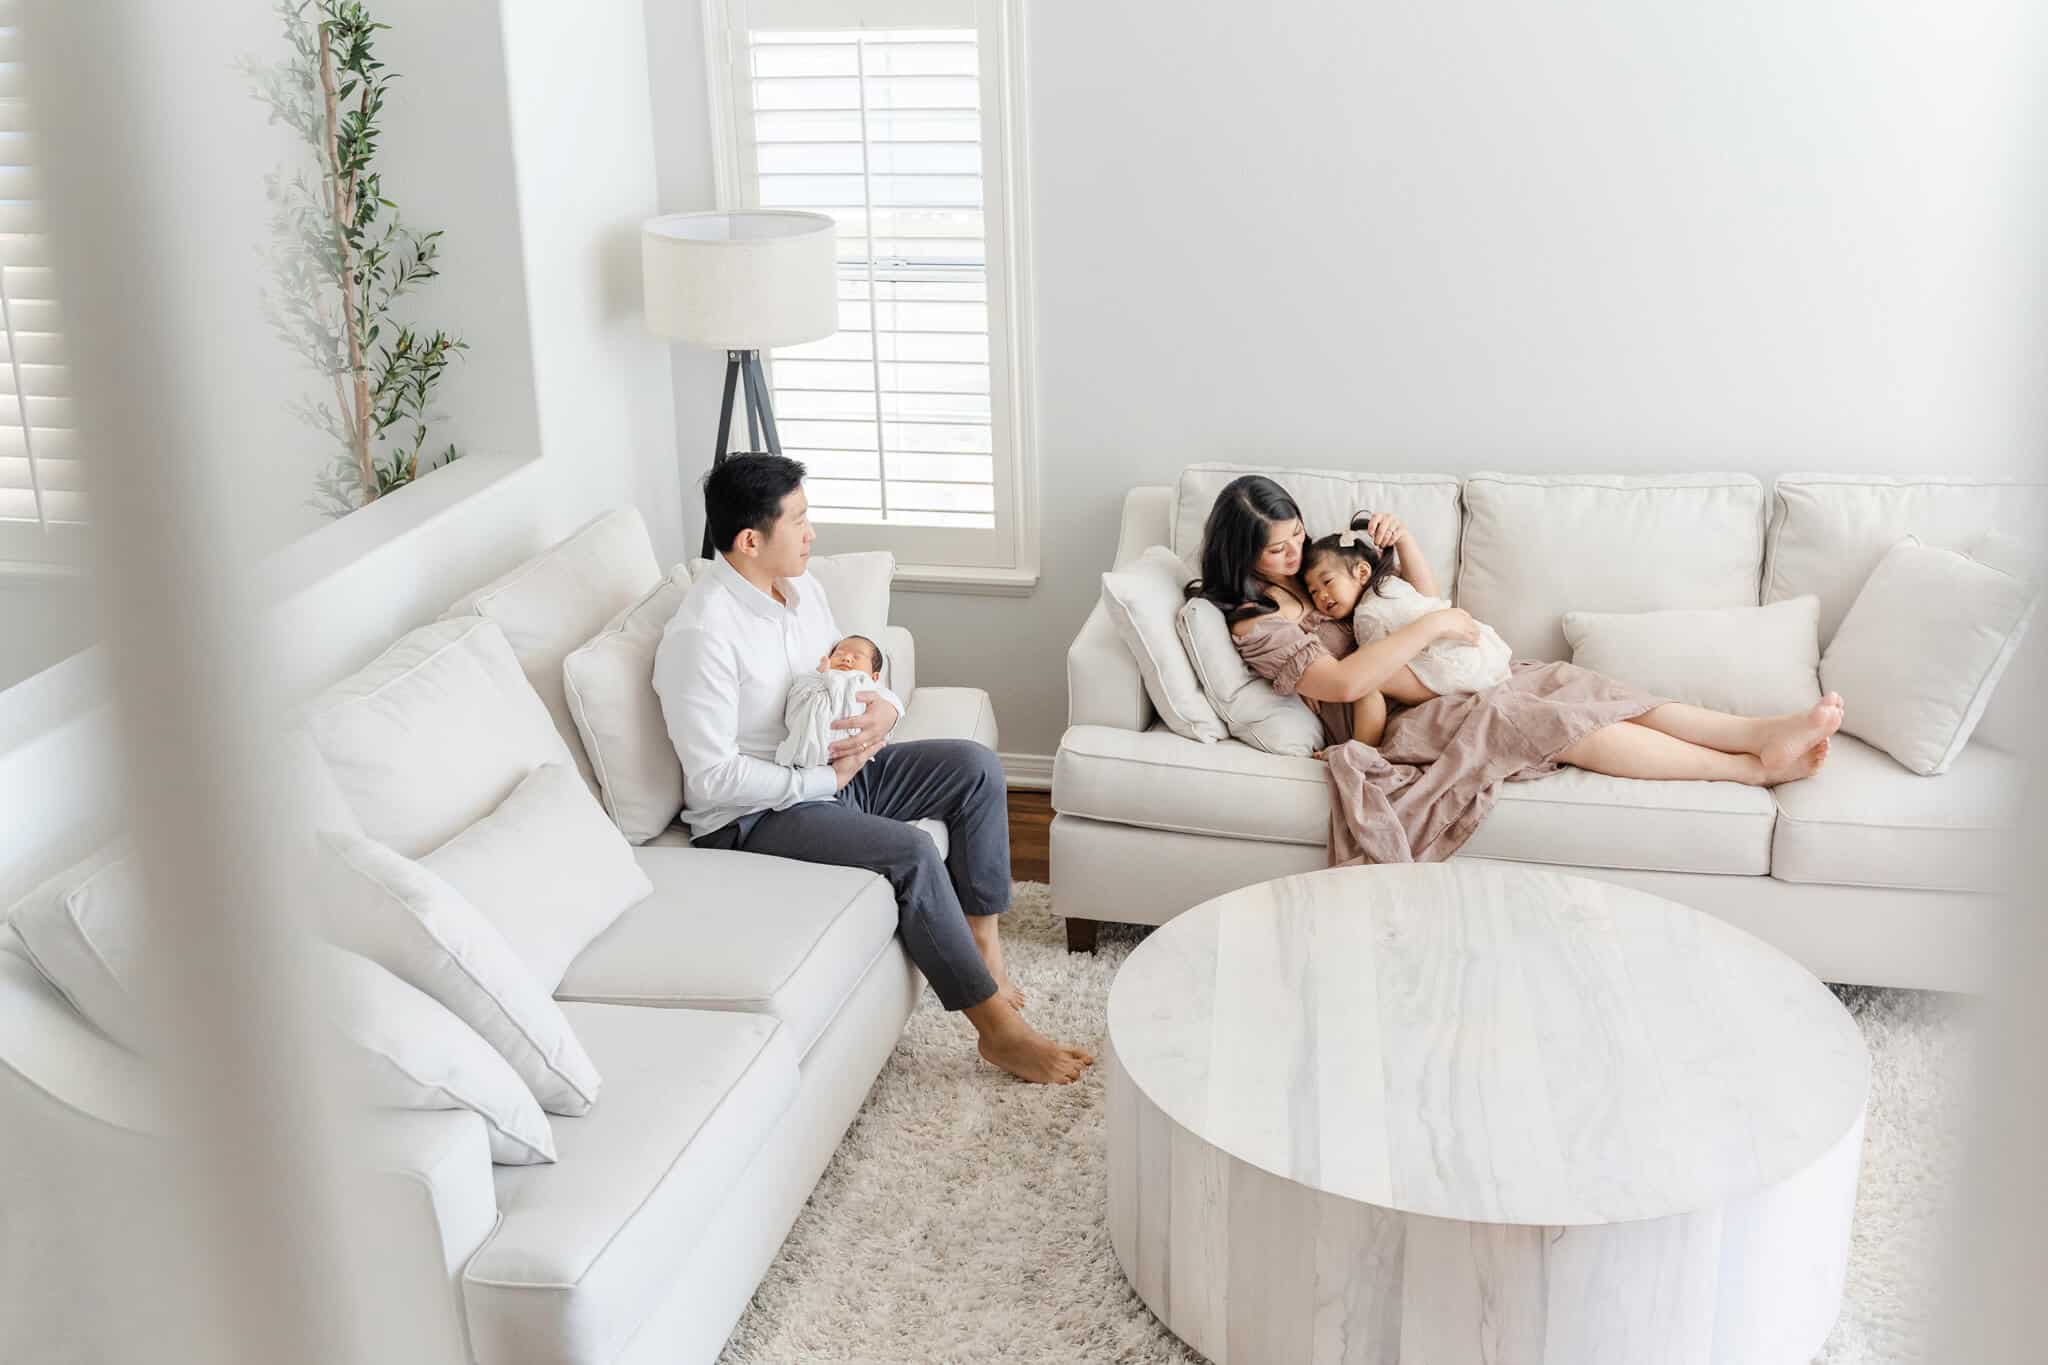 Mom cuddling with daughter, dad holding baby infant, relaxing on sofas in their light and airy home in the living room- Irvine Pediatricians